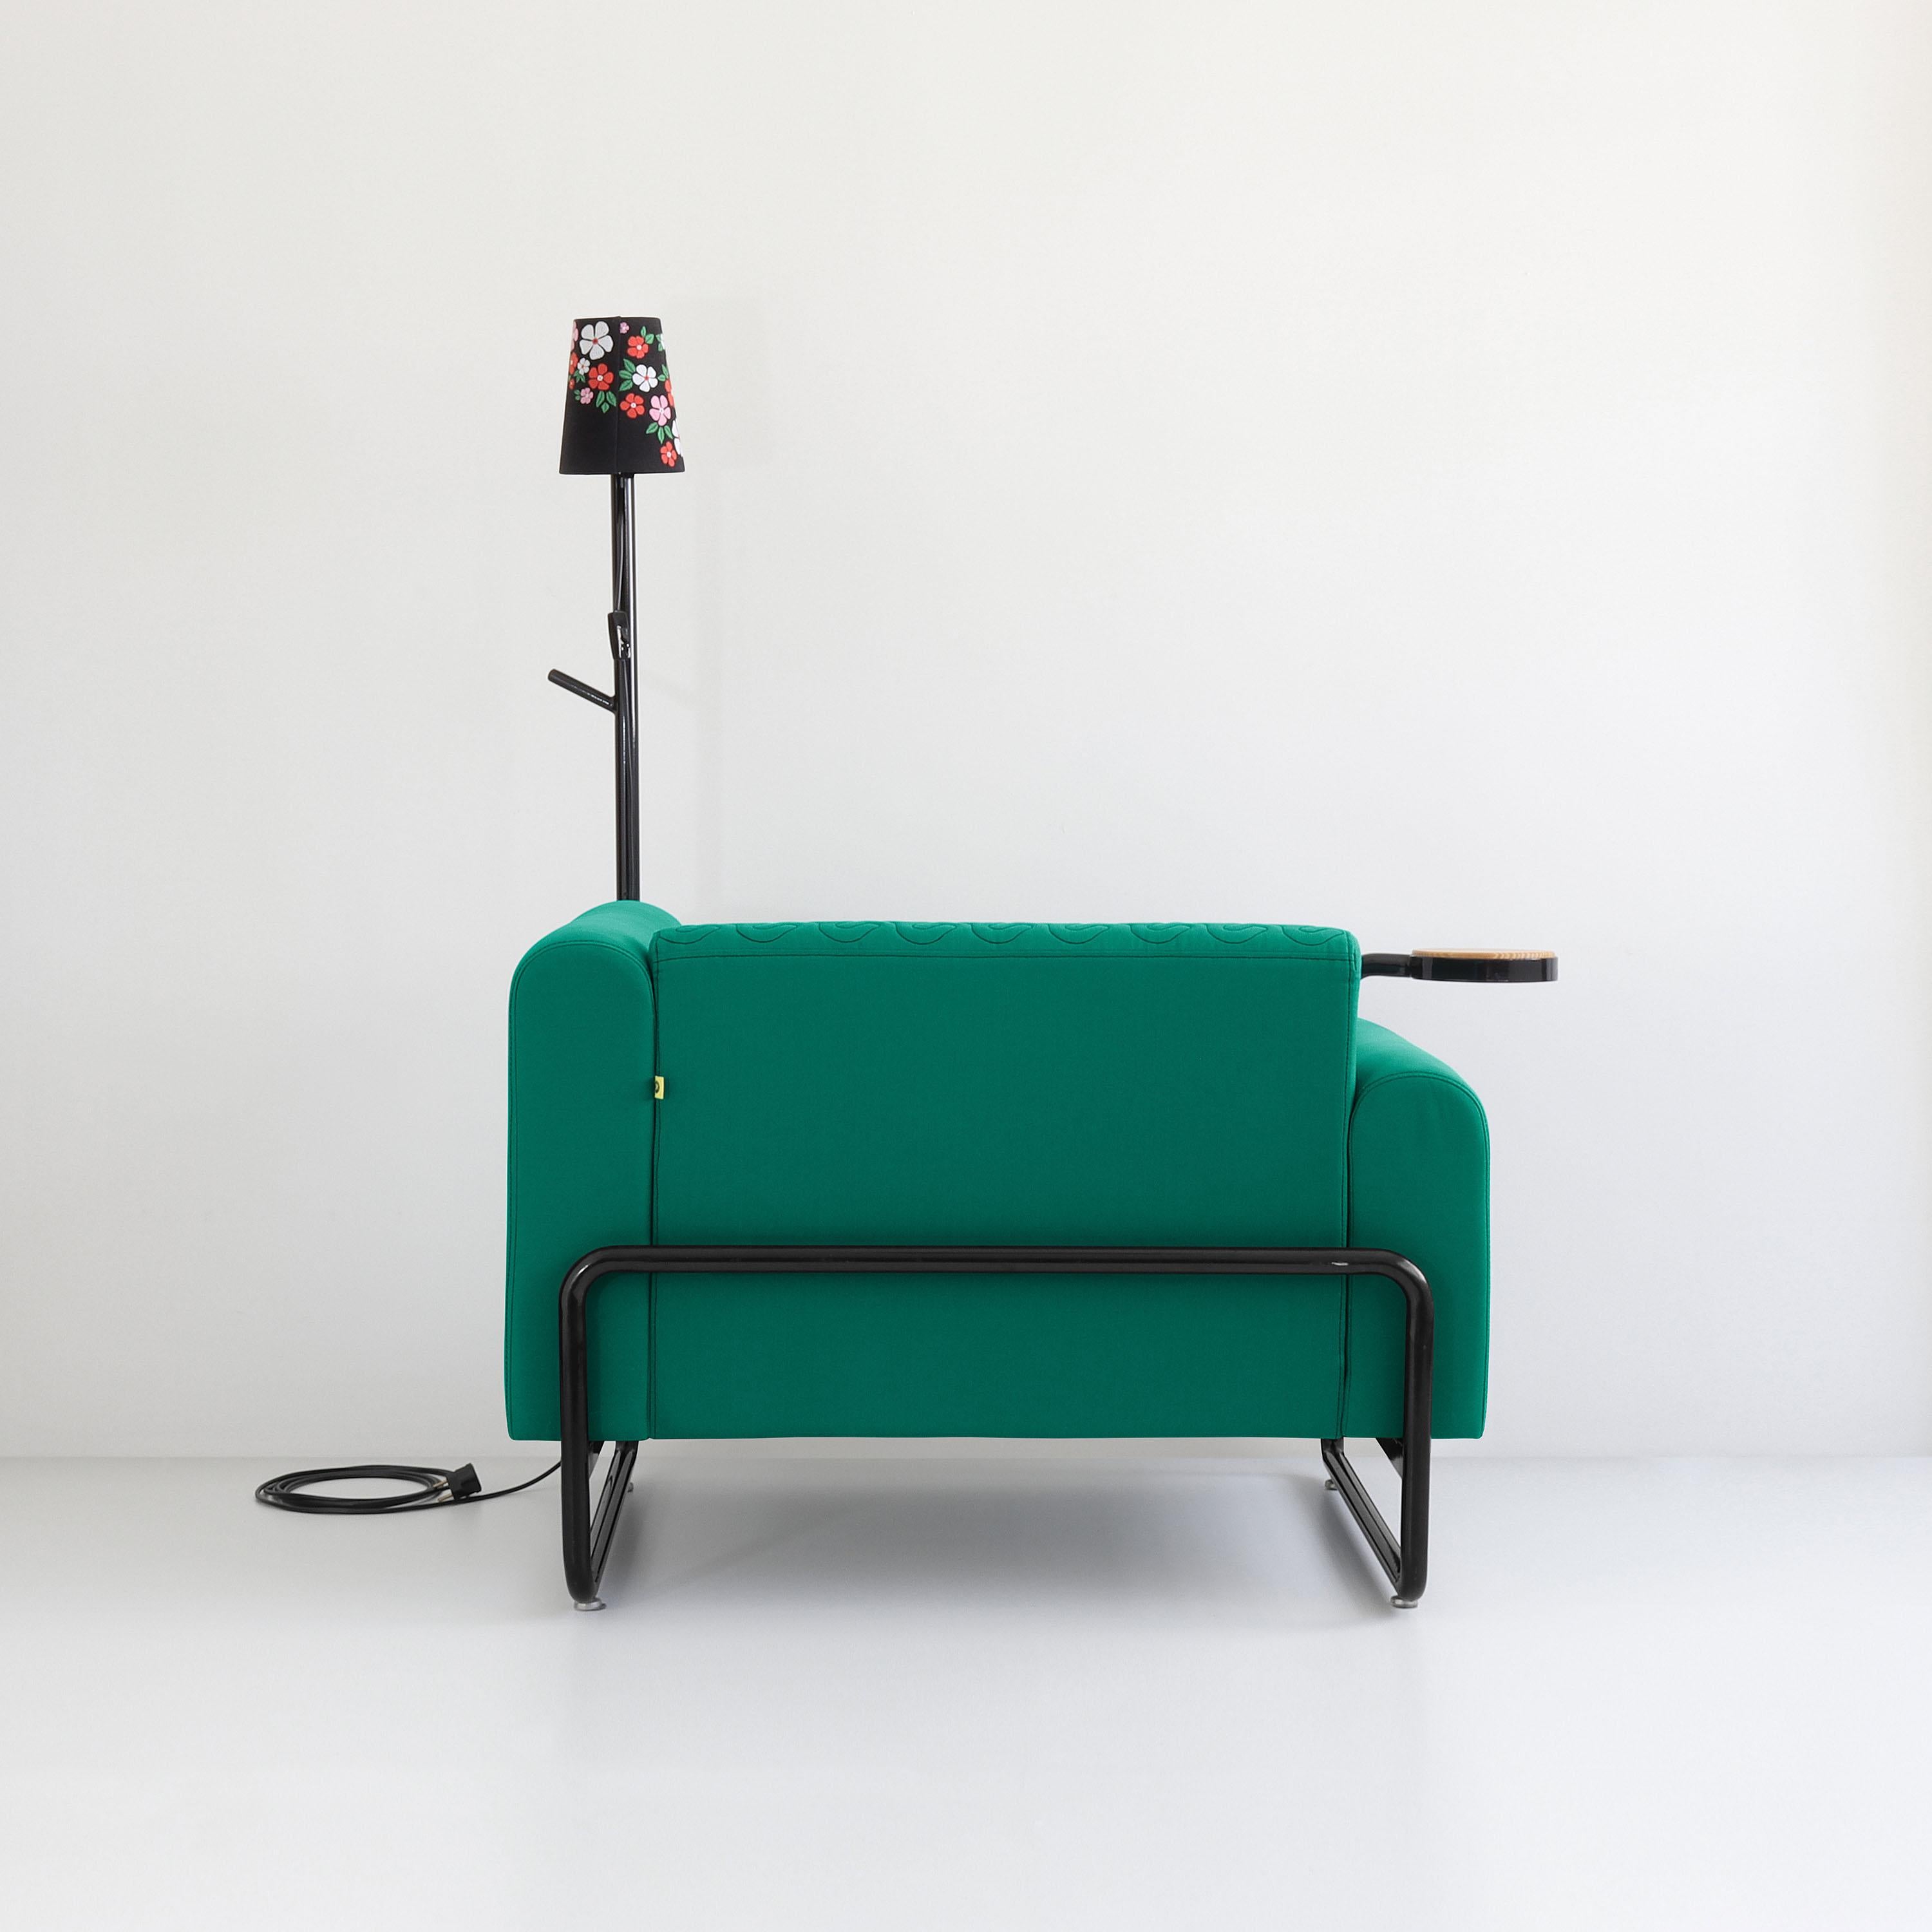 Hand-Crafted Green PK8 Armchair, Seat-Lamp Hybrid, Handmade Metal Structure by Paulo Kobylka For Sale